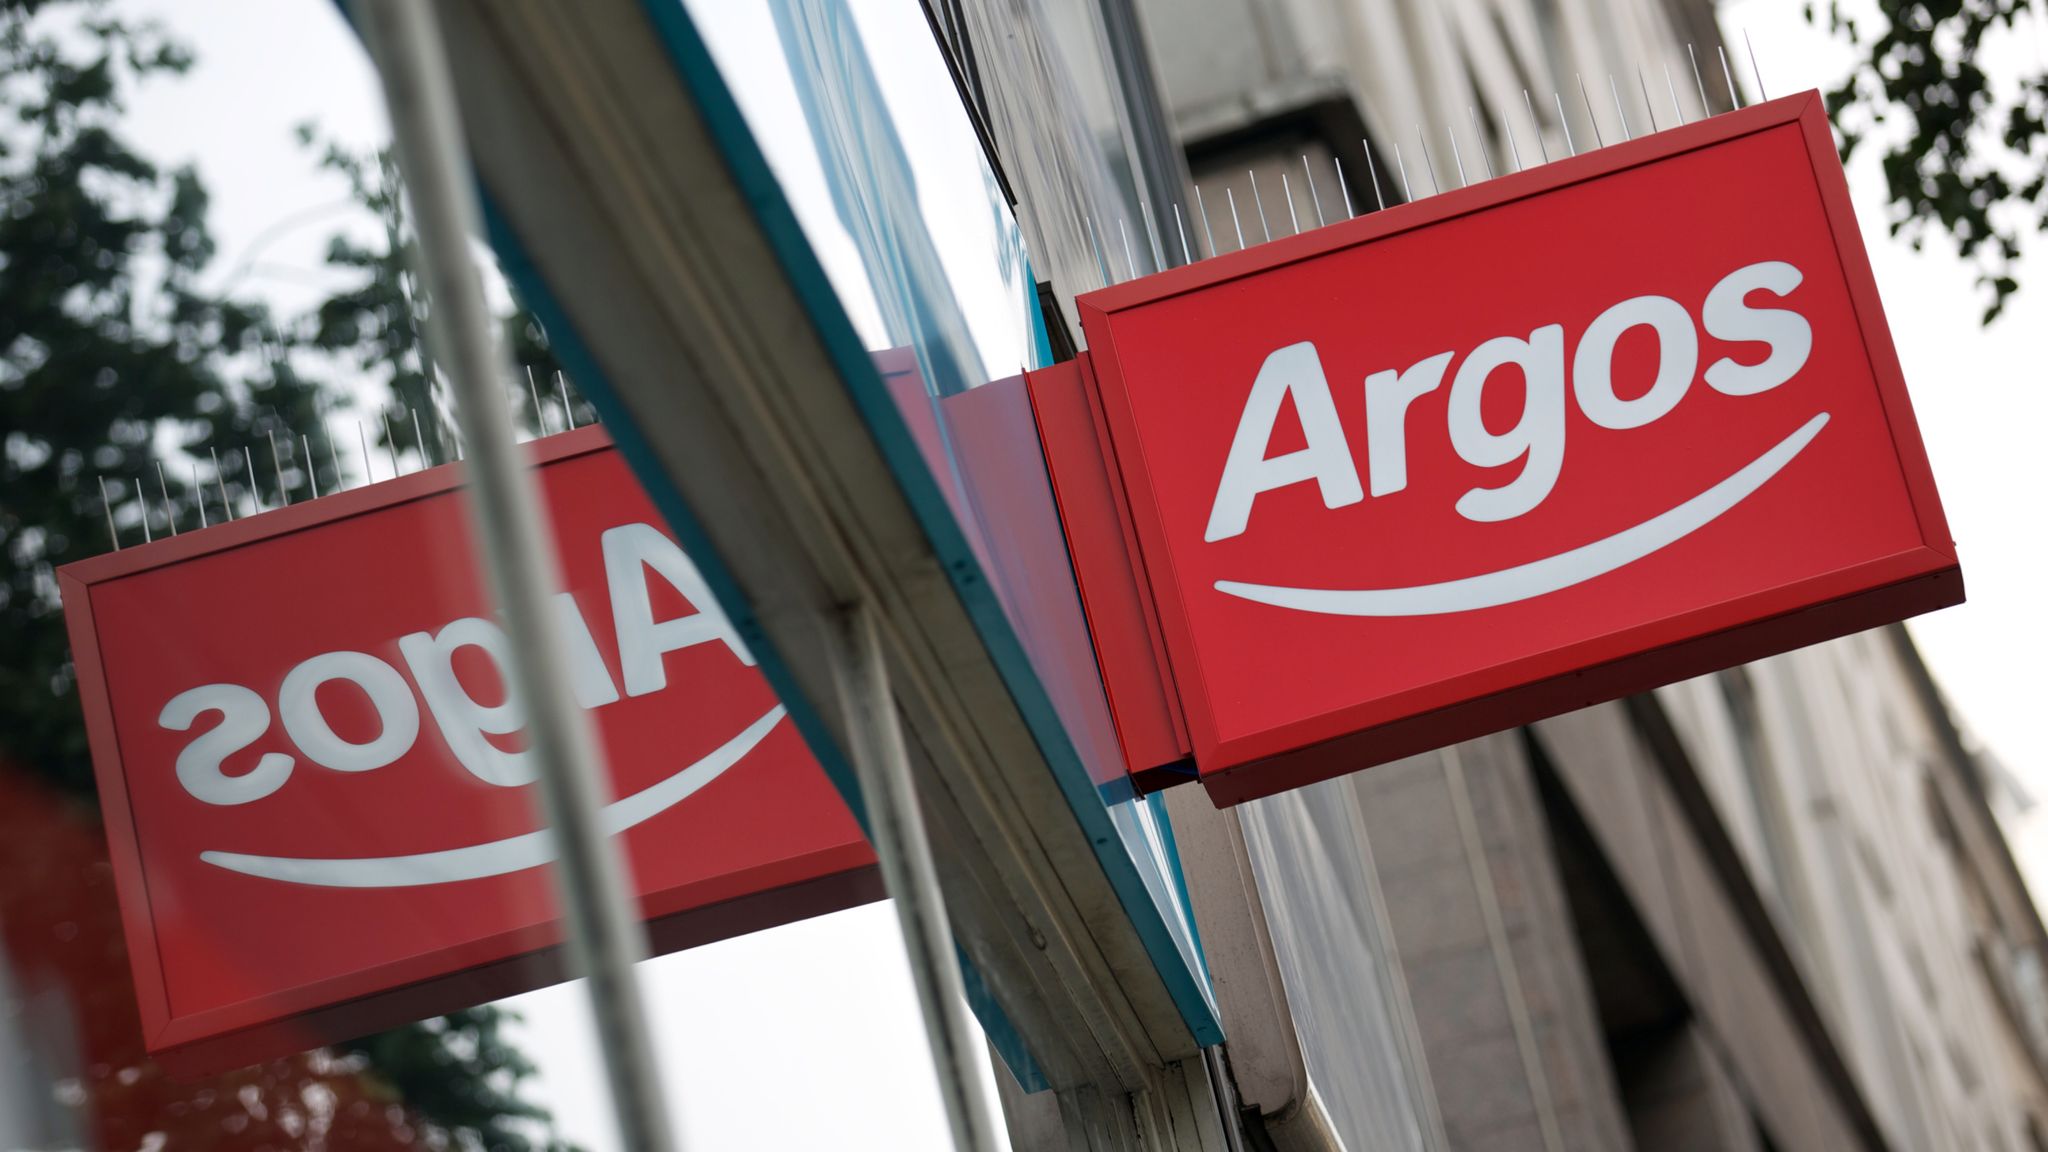 Argos has welcomed the pay deal. 